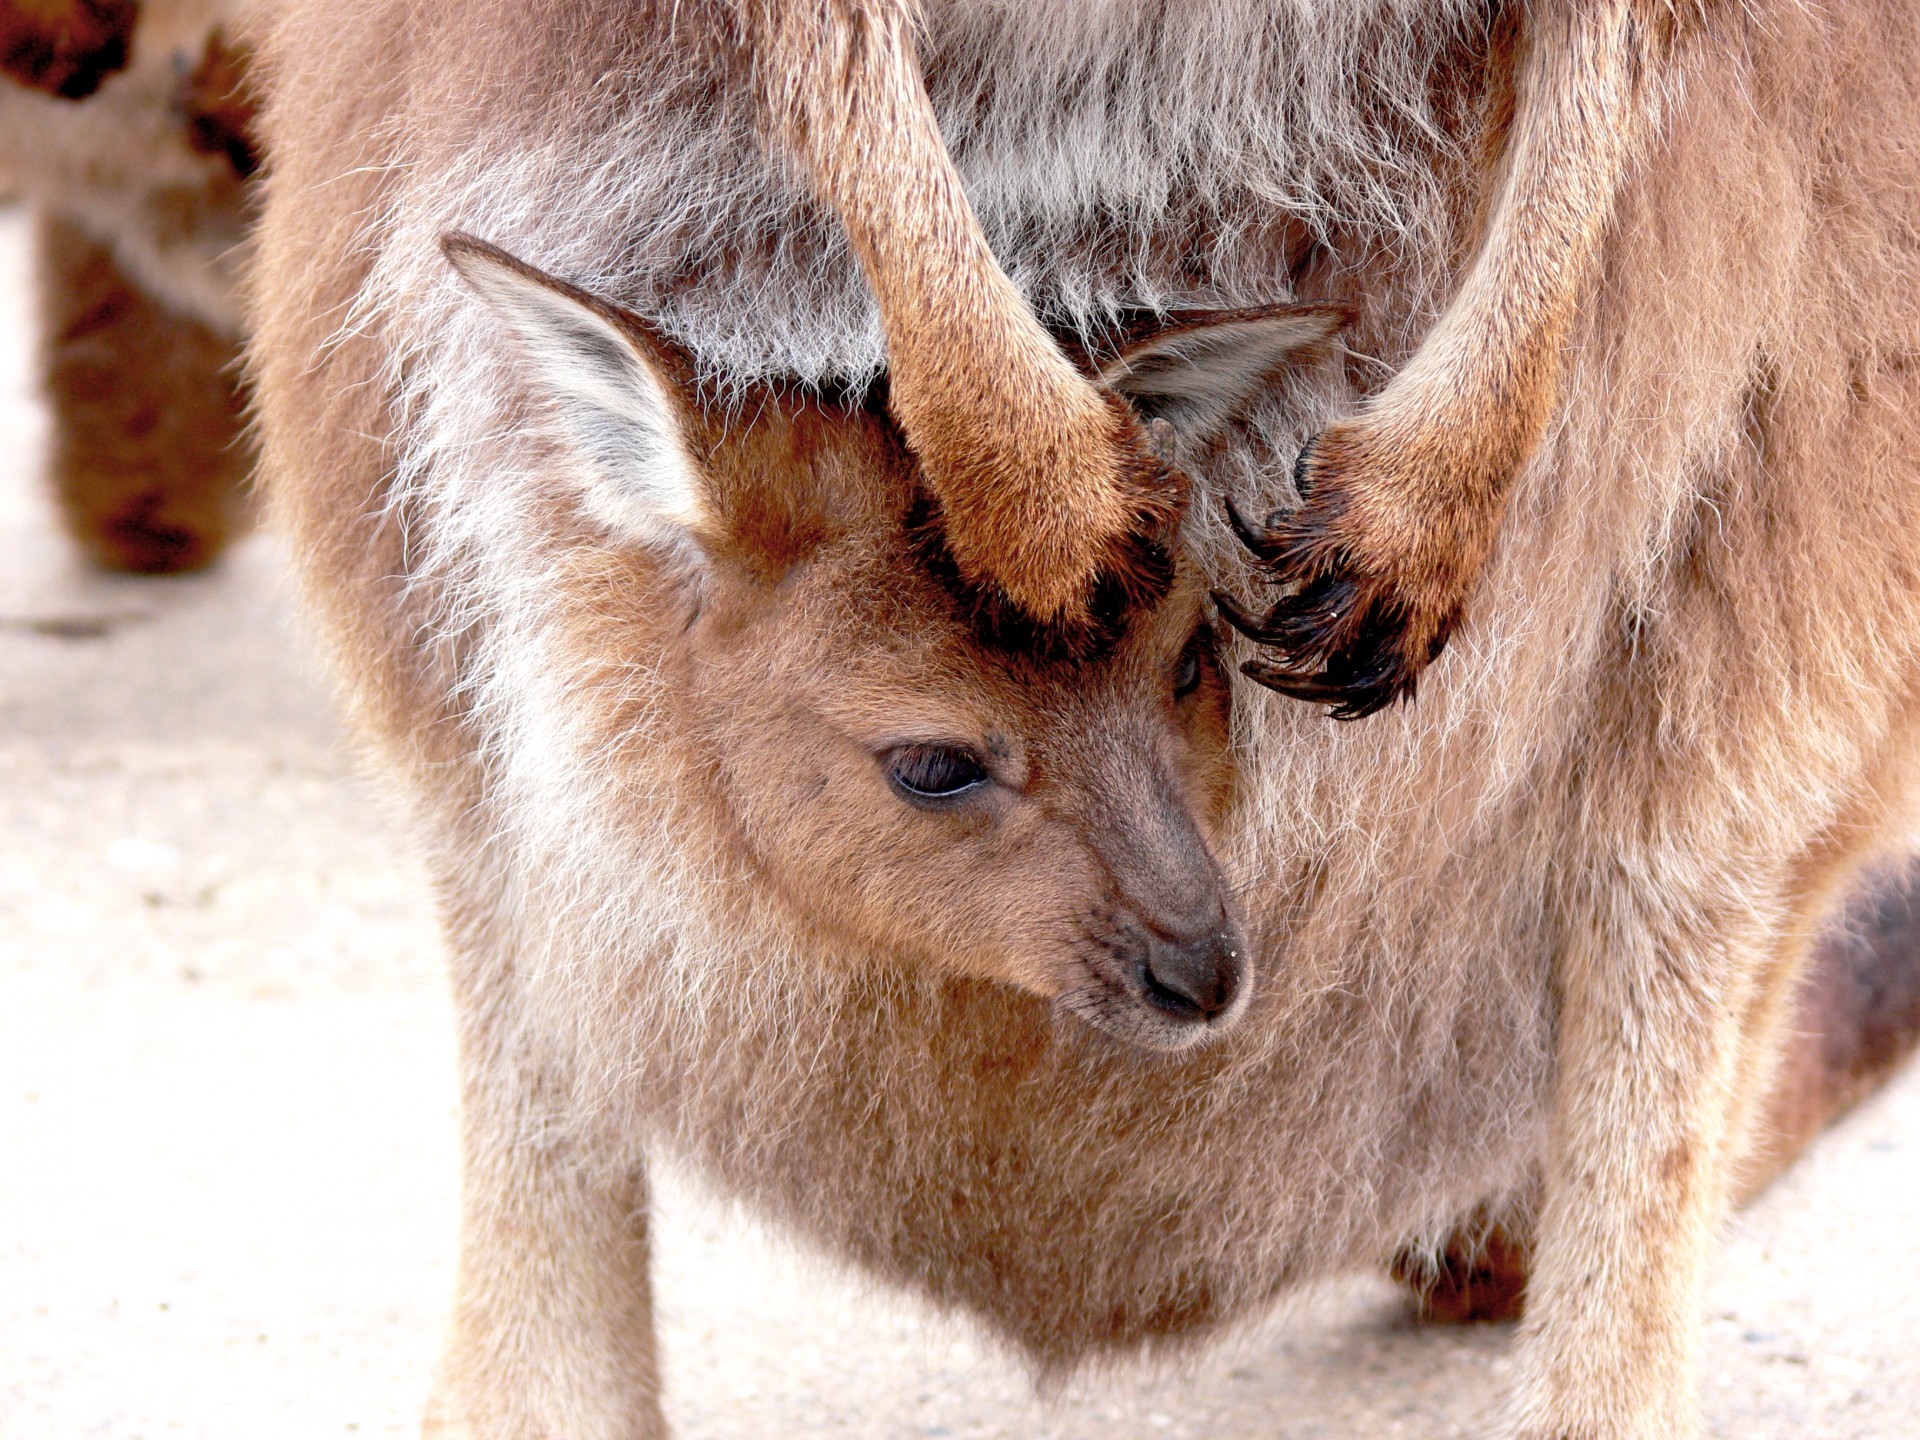 kangaroo-joey-in-pouch-free-stock-photo-public-domain-pictures